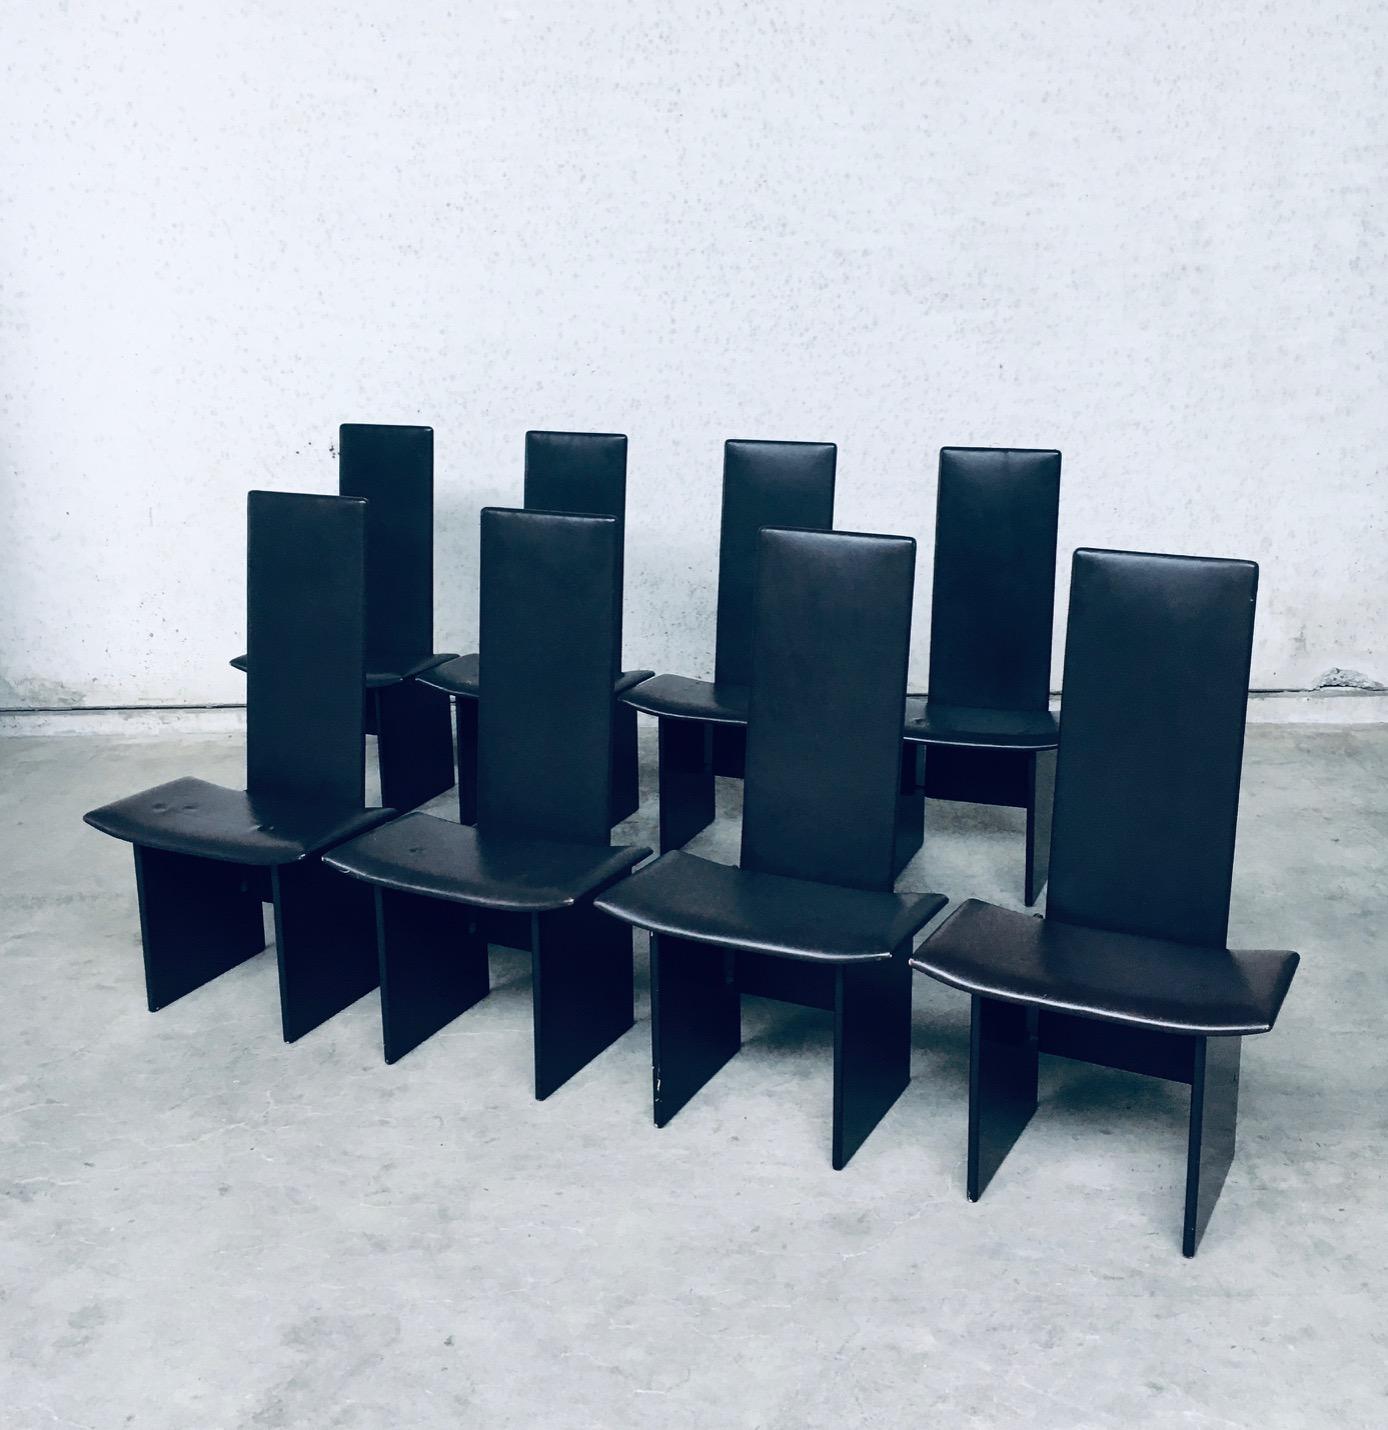 Vintage Postmodern Design 'RENNIE' Dining Chair set of 8 by Kazuhide Takahama for Simon Gavina, made in Italy 1980's. Architectural design dining chairs in dark brown. The seat and back are in dark chocolate brown faux leather and the feet are in